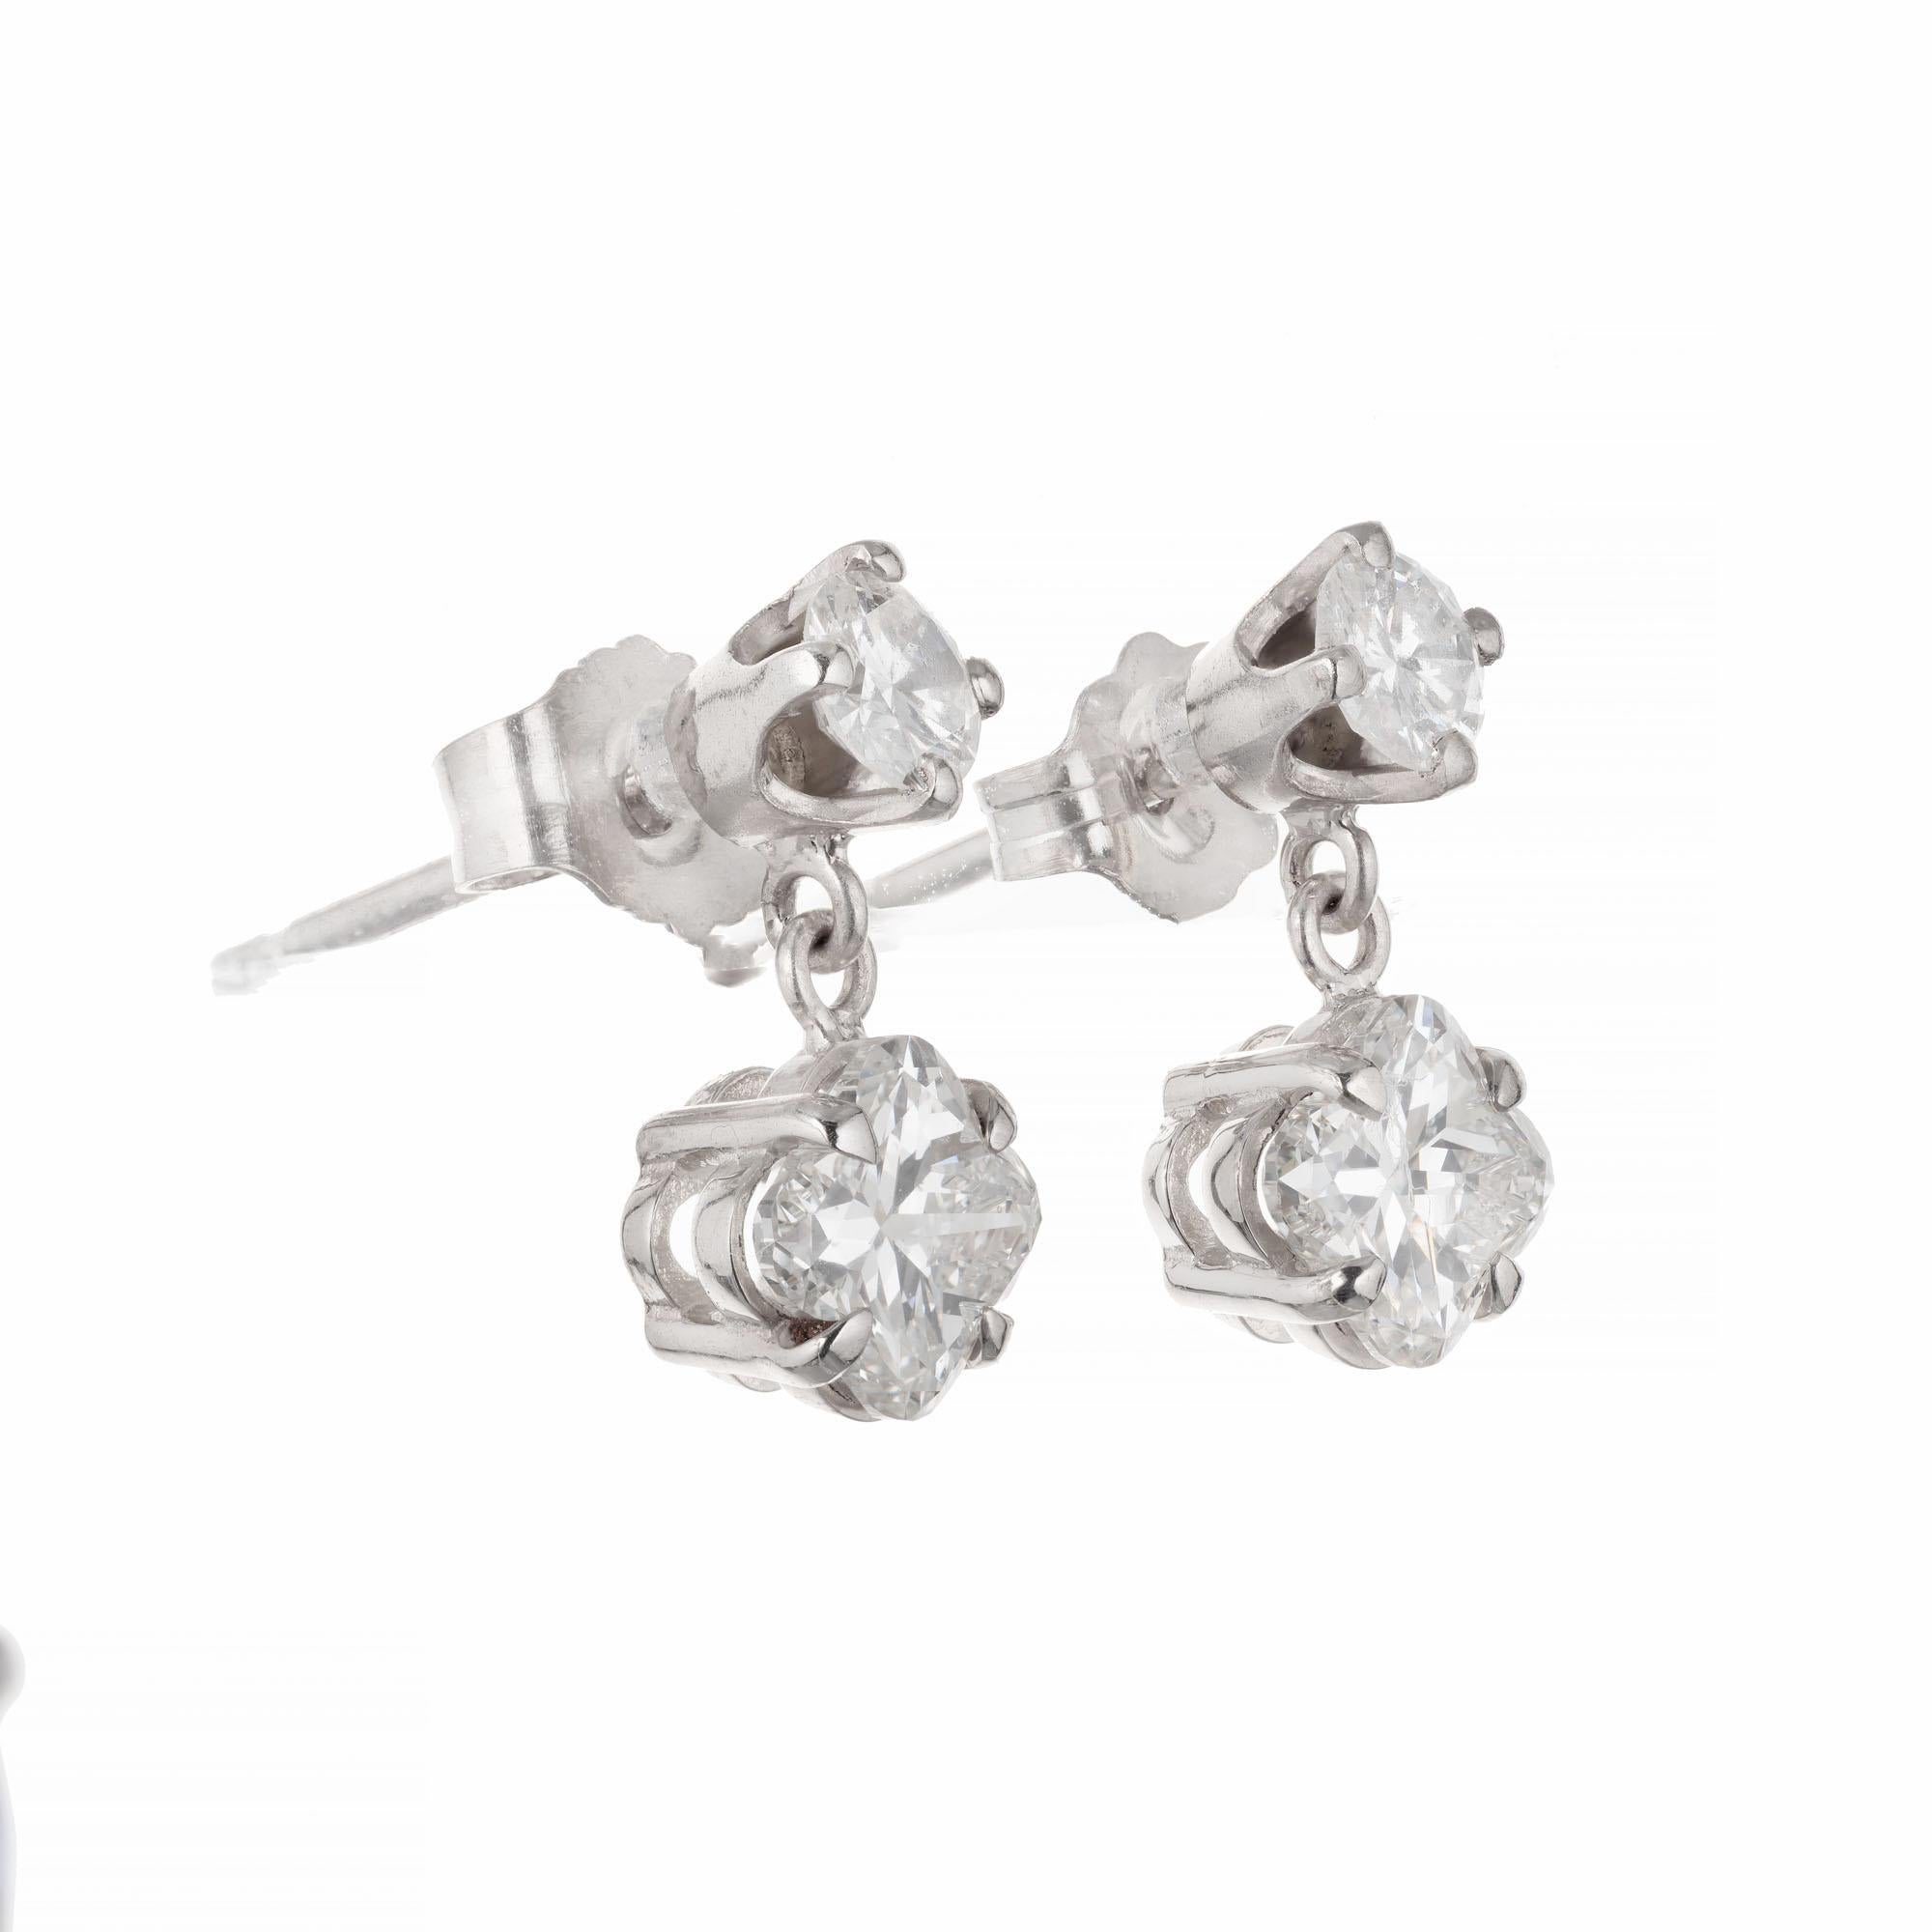 Lily cut diamond dangle earrings. 2 lily cut diamonds with 2 round accent diamonds set in platinum. Made in the Peter Suchy Worshop

2 lily cut diamonds GH VS, approx. .98cts
2 round brilliant cut diamonds GHVS-SI approx.  .27cts
Platinum 
Stamped: